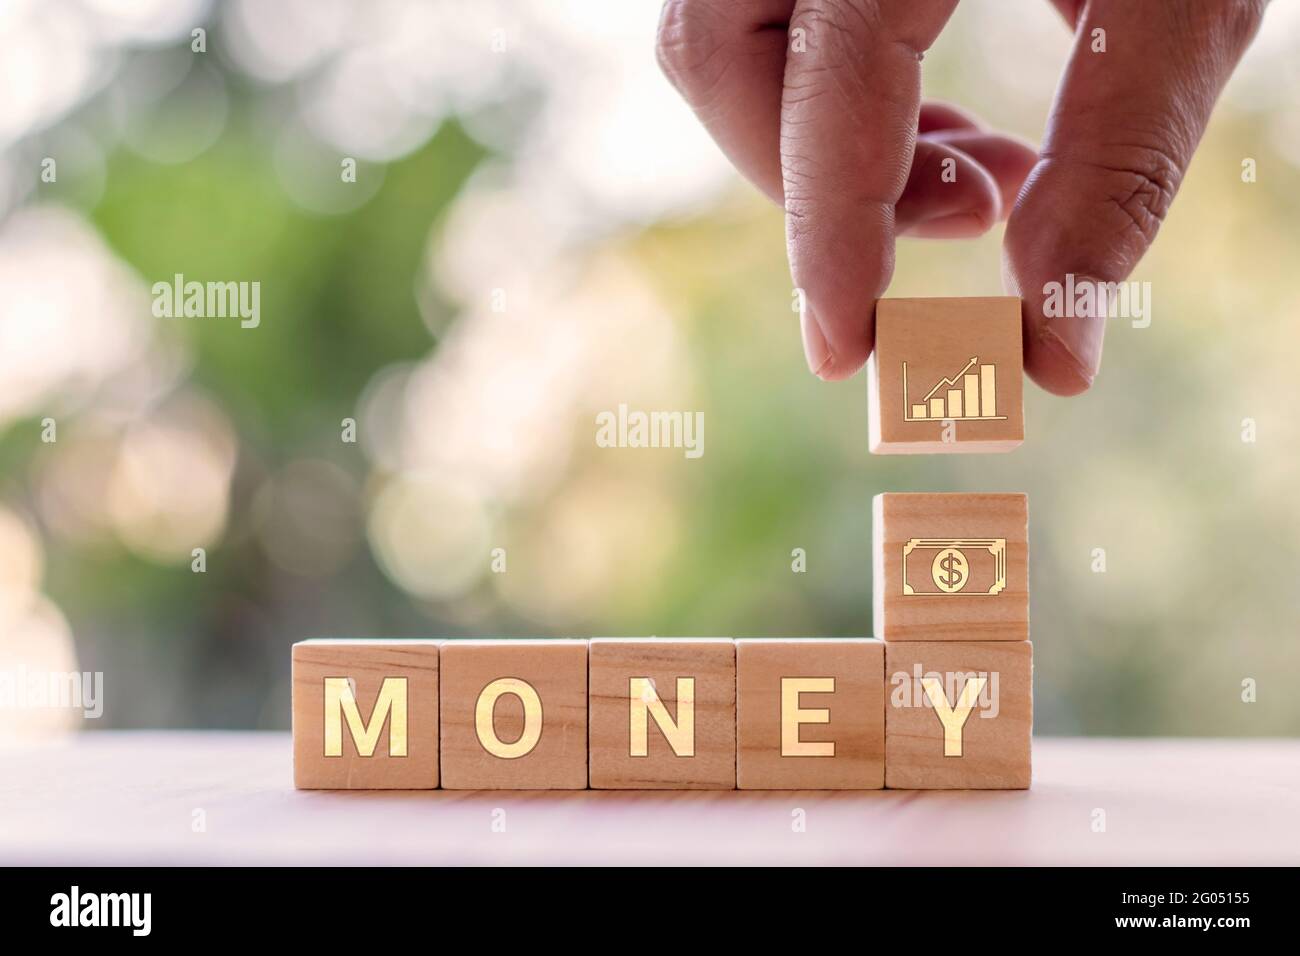 A hand holding a square wooden block with graph icons with MONEY messages. Ideas for financial and business growth. Stock Photo